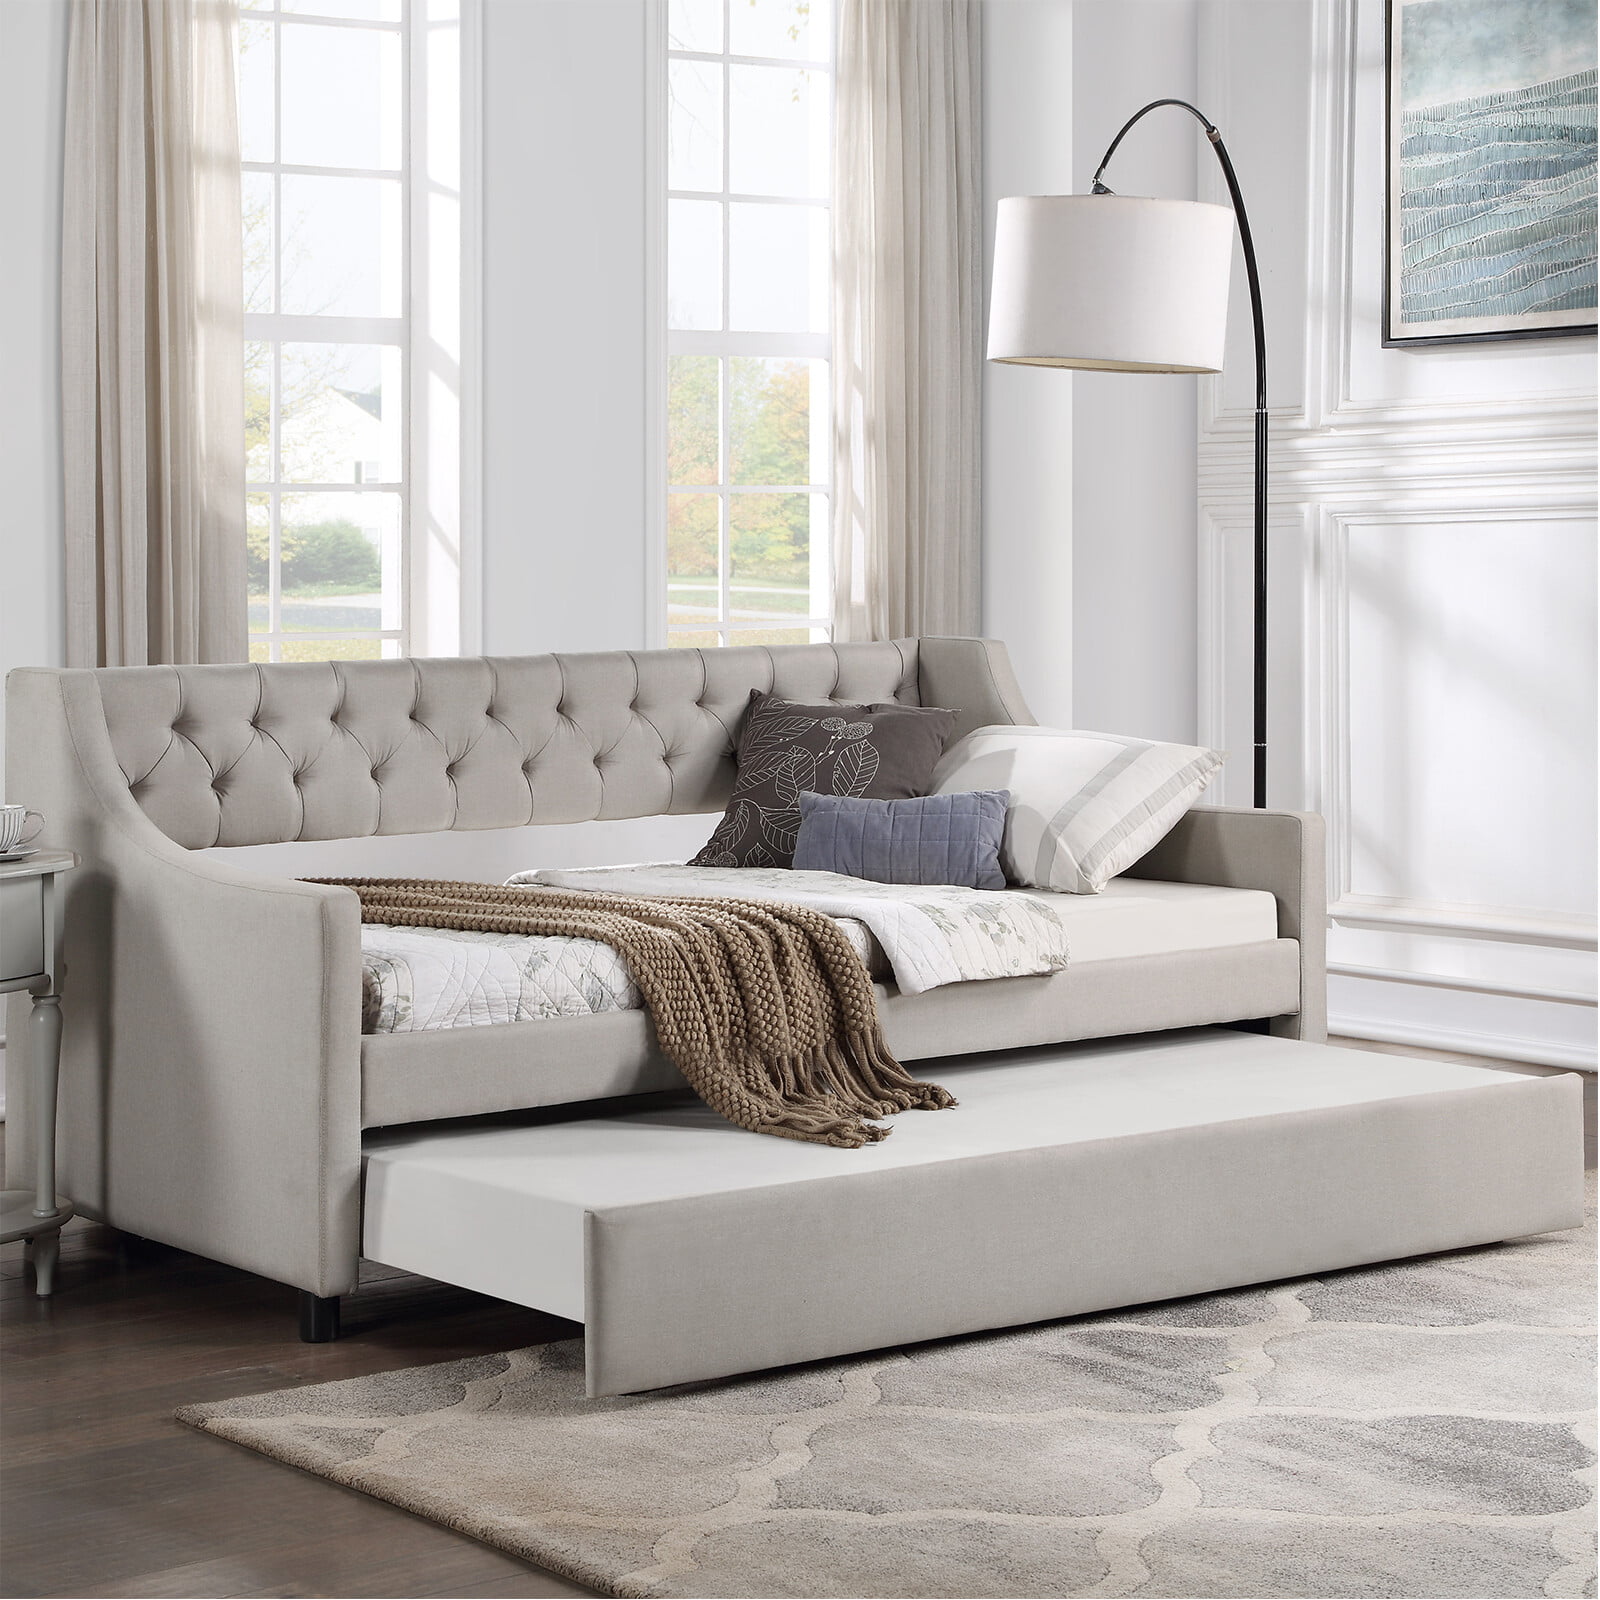 Masbekte Twin Daybed With Trundle, Upholstered Tufted Sofa Bed